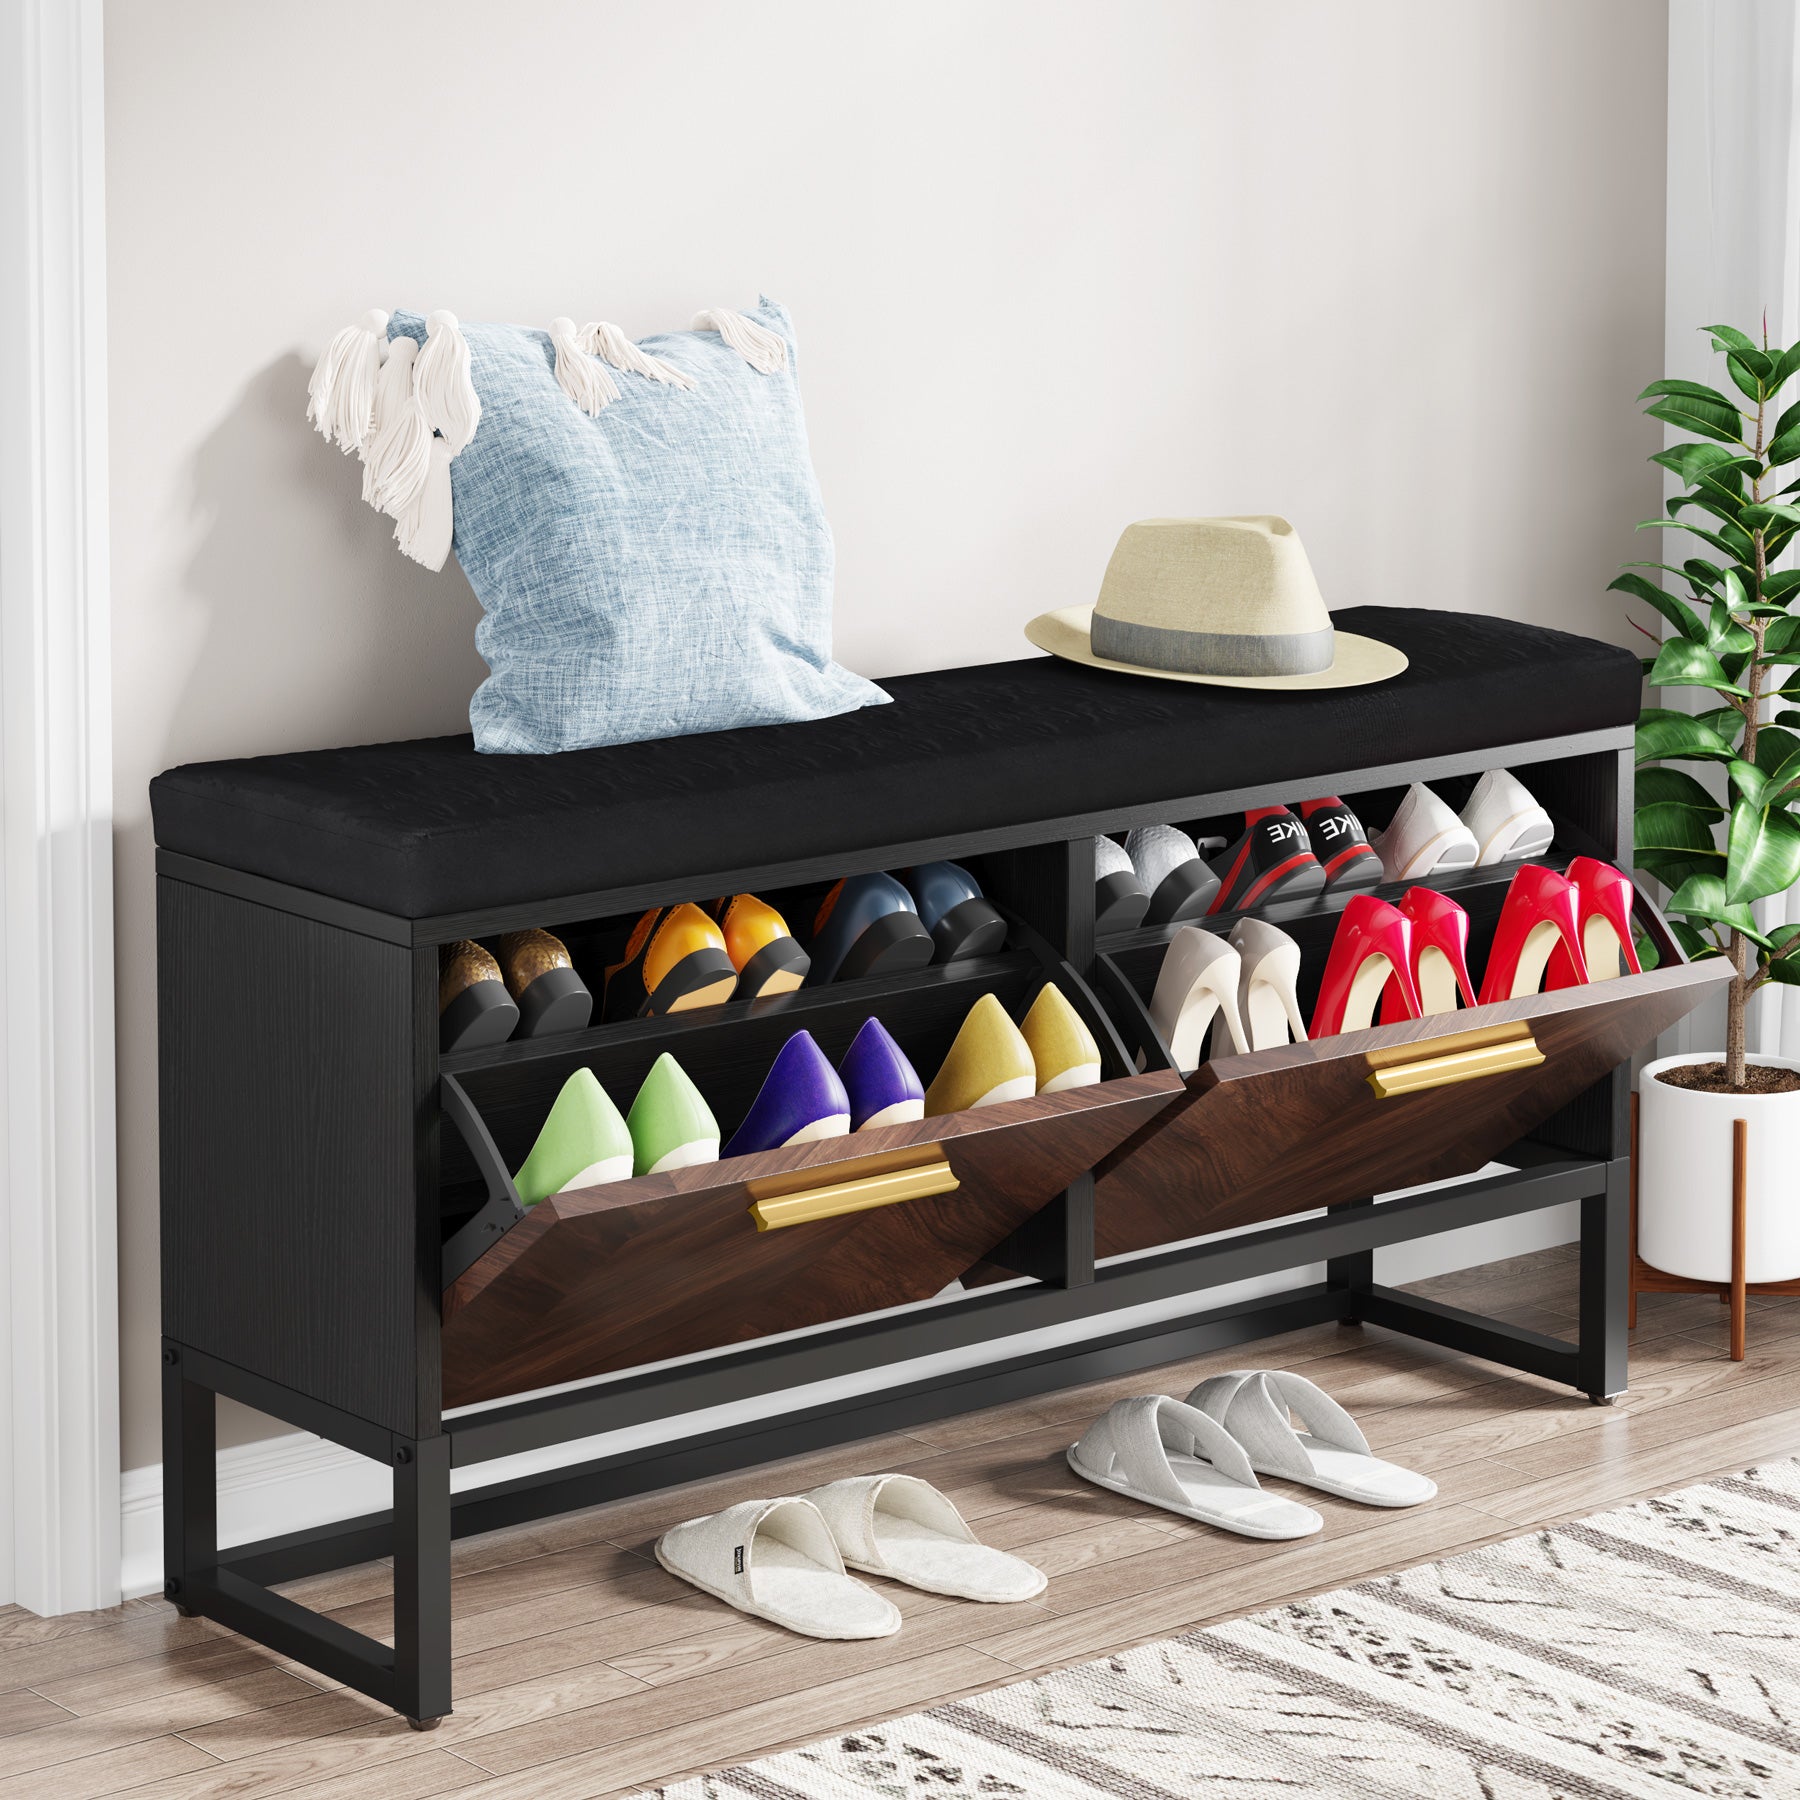 10 Entryway Shoe Storage Solutions for Every Home